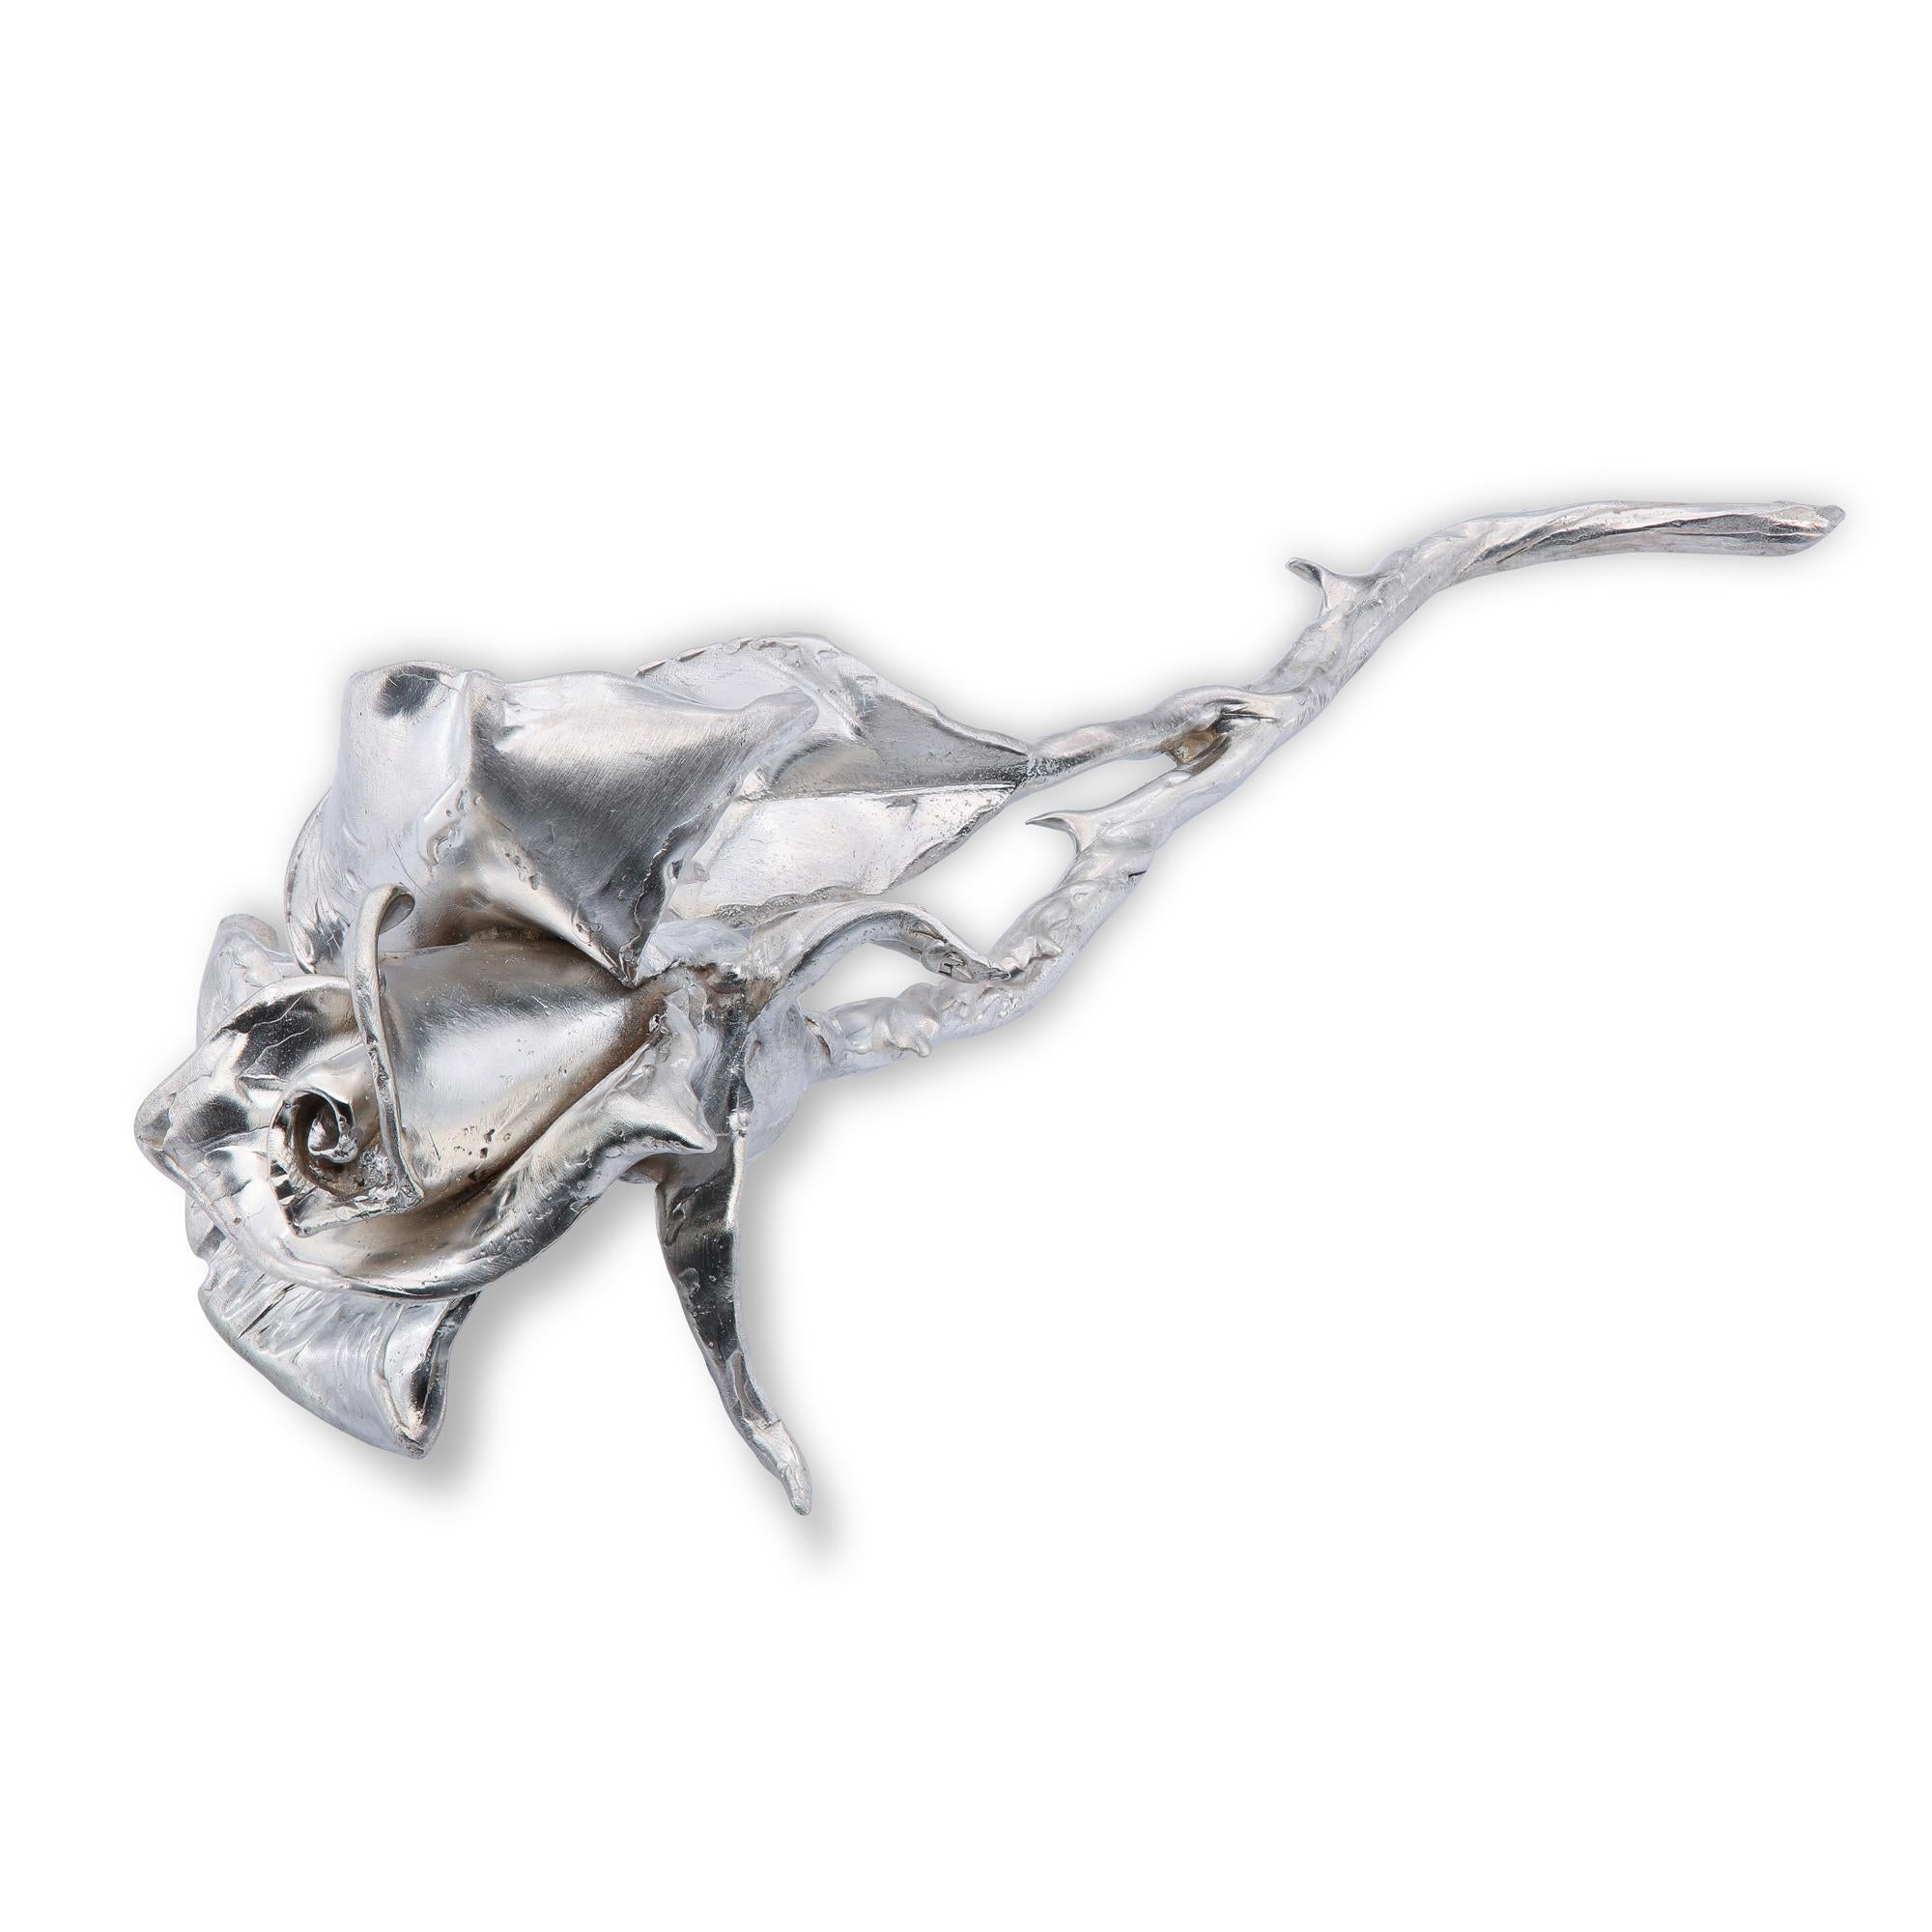 A Rose made in full 950 ‰ silver
Exactly like natural flowers, our Roses are Uniques, each one a different Creation
Make a Romantic Gift or just give your home a Precious touch with this very special Piece



